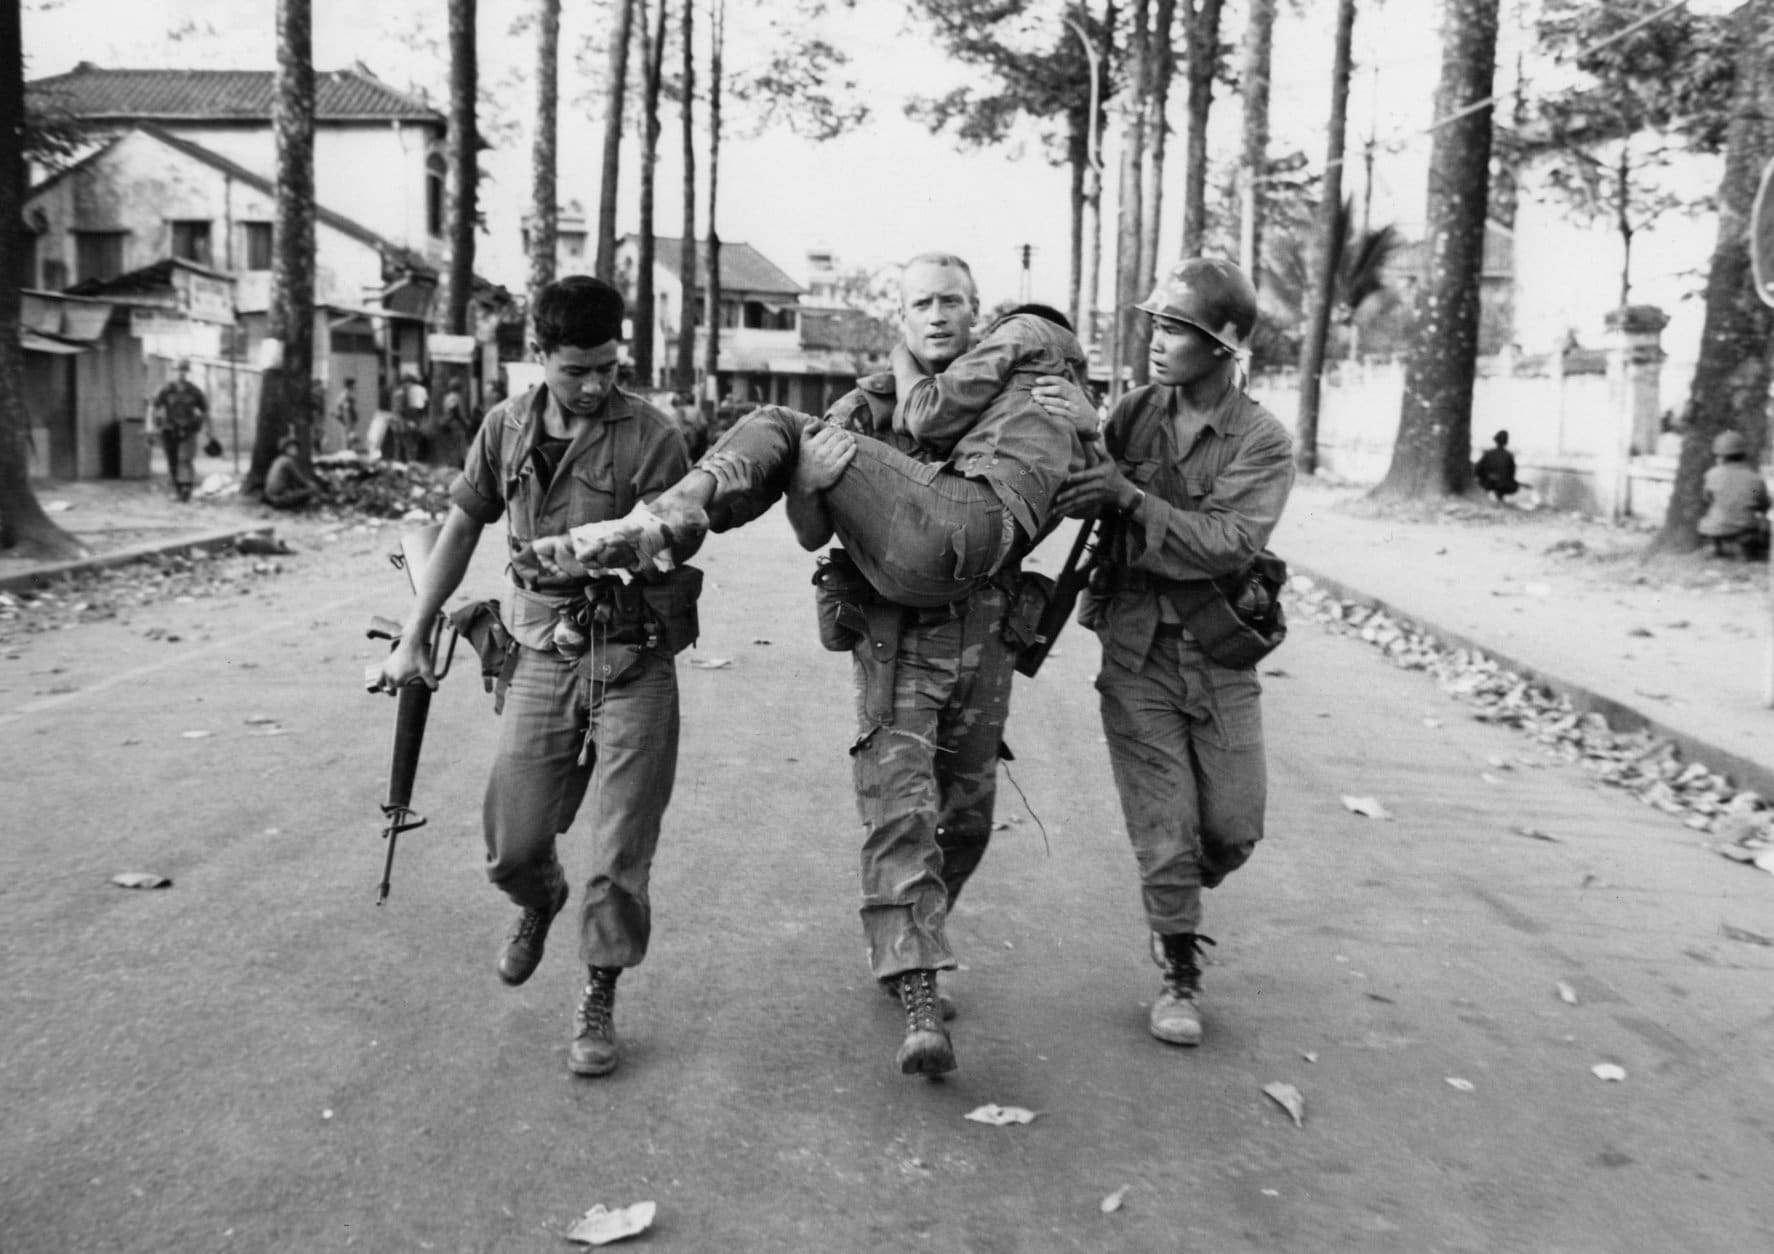 FILE - In his Feb. 6, 1968, file photo, First Lt. Gary D. Jackson of Dayton, Ohio, carries a wounded South Vietnamese Ranger to an ambulance after a brief but intense battle with the Viet Cong during the Tet Offensive near the National Sports Stadium in the Cholon section of Saigon. Early on the morning of Jan. 31, 1968, as Vietnamese celebrated the Lunar New Year, or Tet as it is known locally, Communist forces launched a wave of coordinated surprise attacks across South Vietnam. The campaign, one of the largest of the Vietnam War, led to intense fighting and heavy casualties in cities and towns across the South. (AP Photo/Dang Van Phuoc, File)